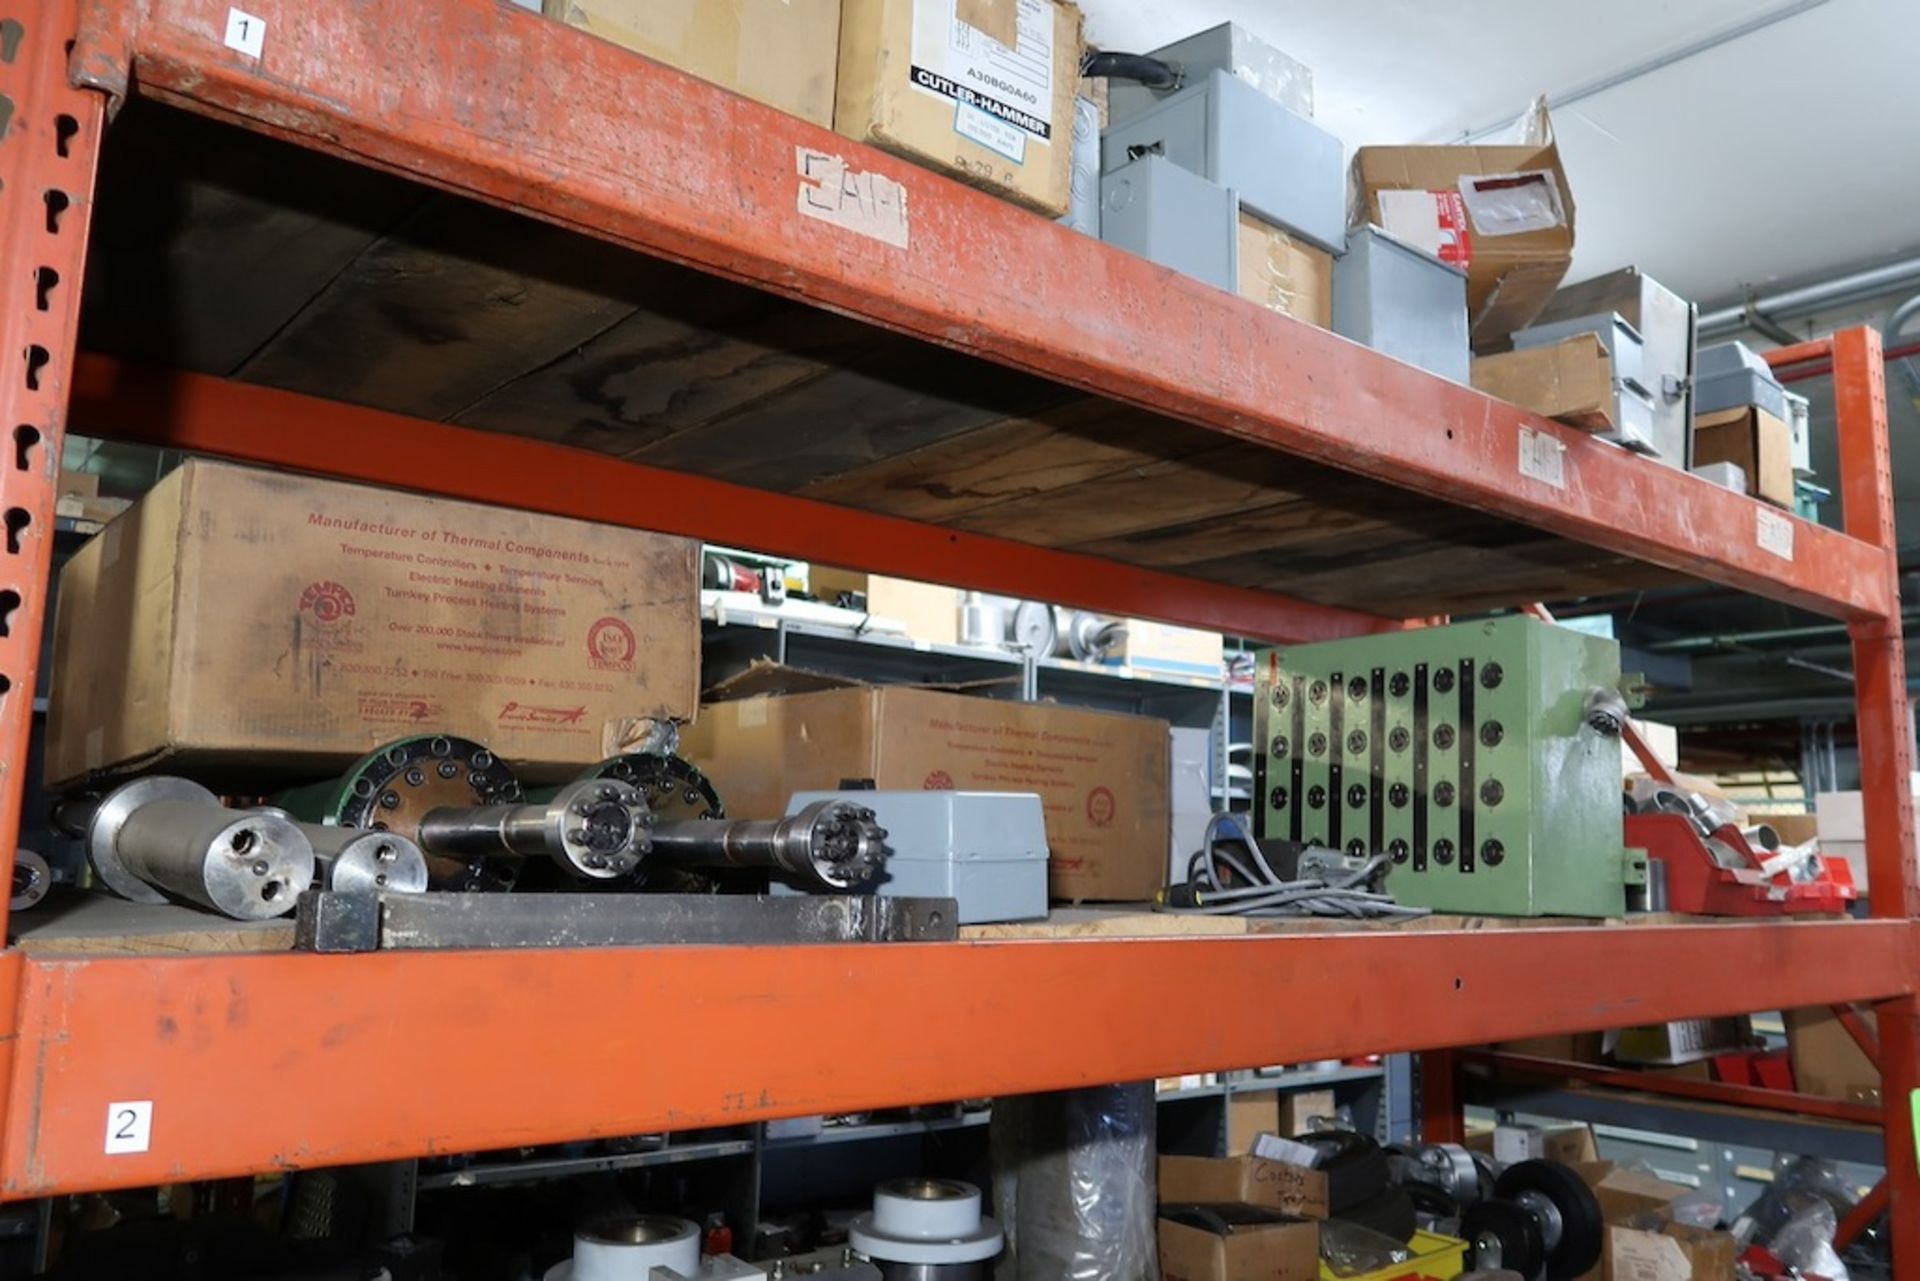 (1) Section of Pallet Racking with Assorted Spare Parts, Hydraulic Pumps, Heat Exchangers, Etc. - Image 7 of 18